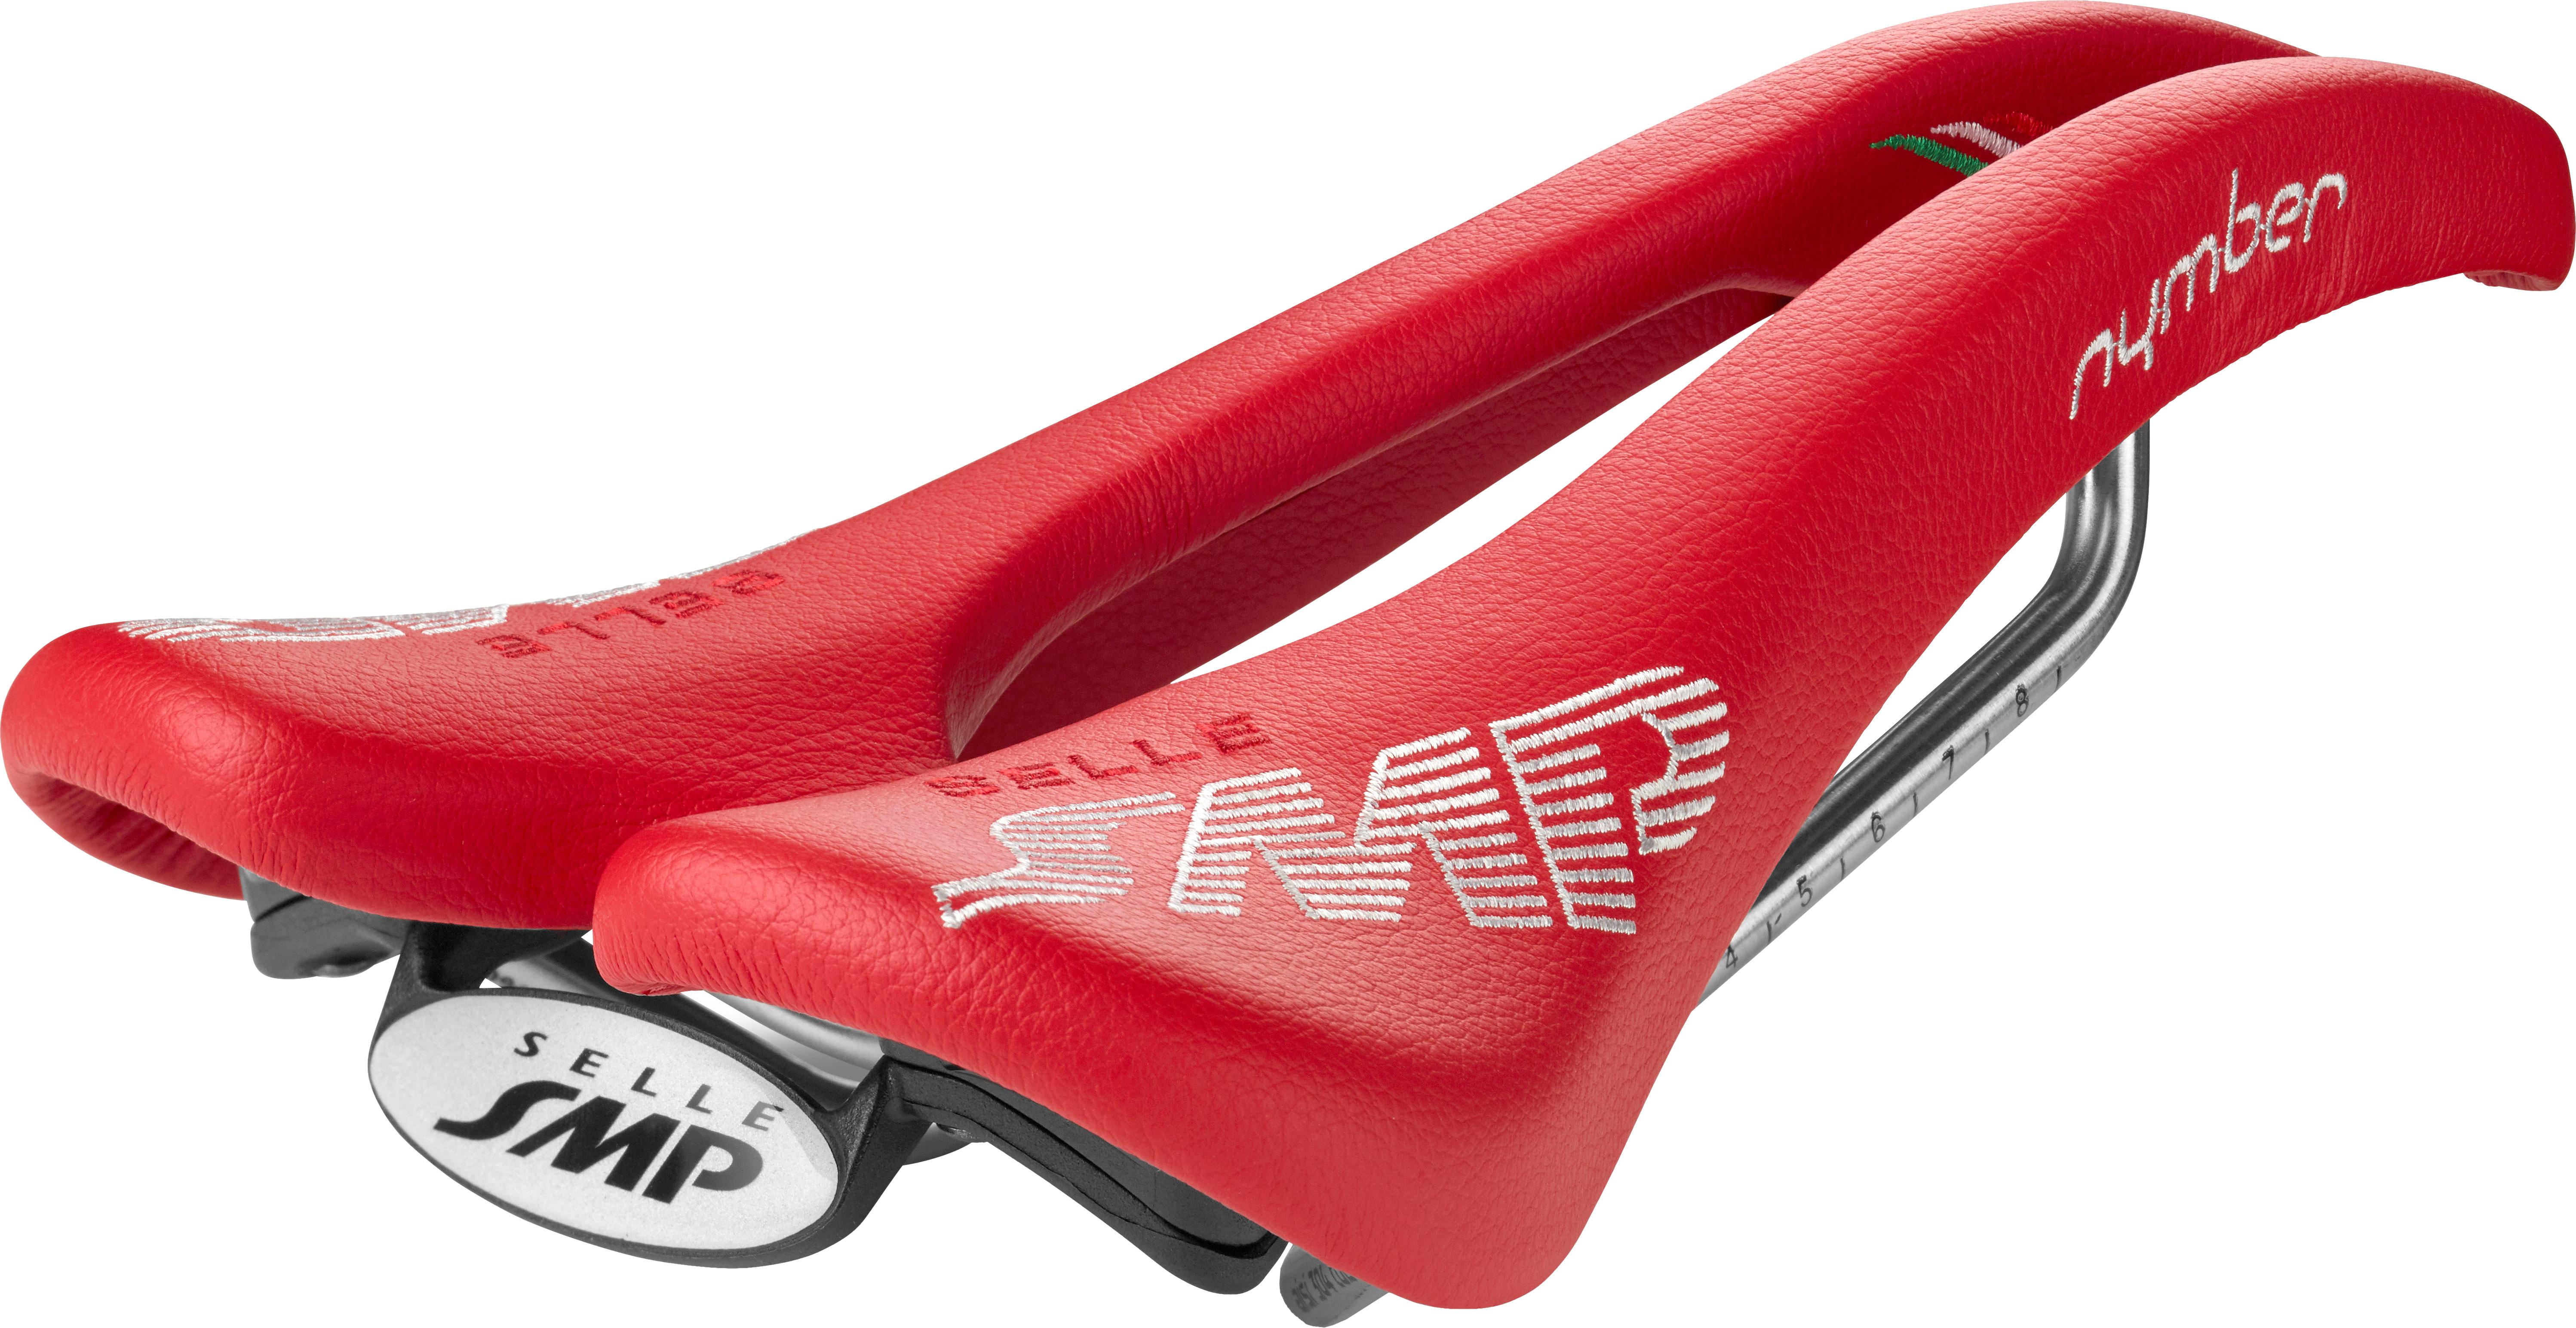 Selle Smp Nymber Bike Saddle  Red